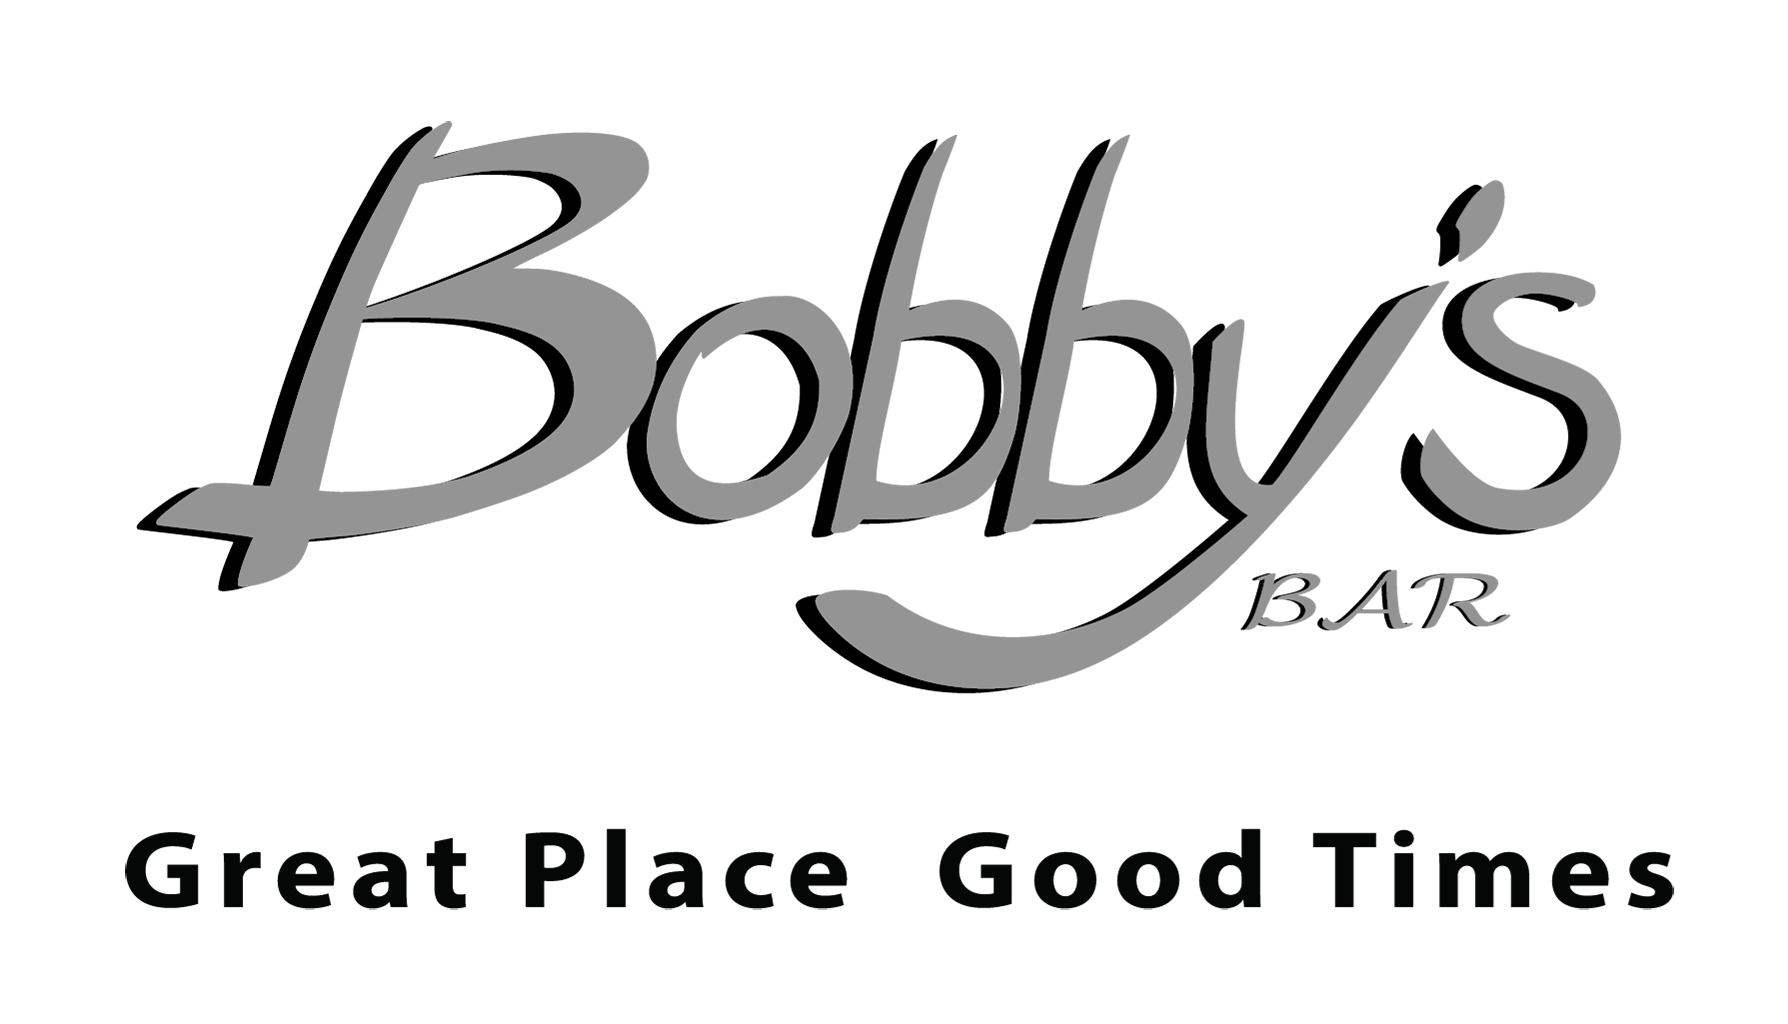 Bobby's Bar - Great Place, Good Times